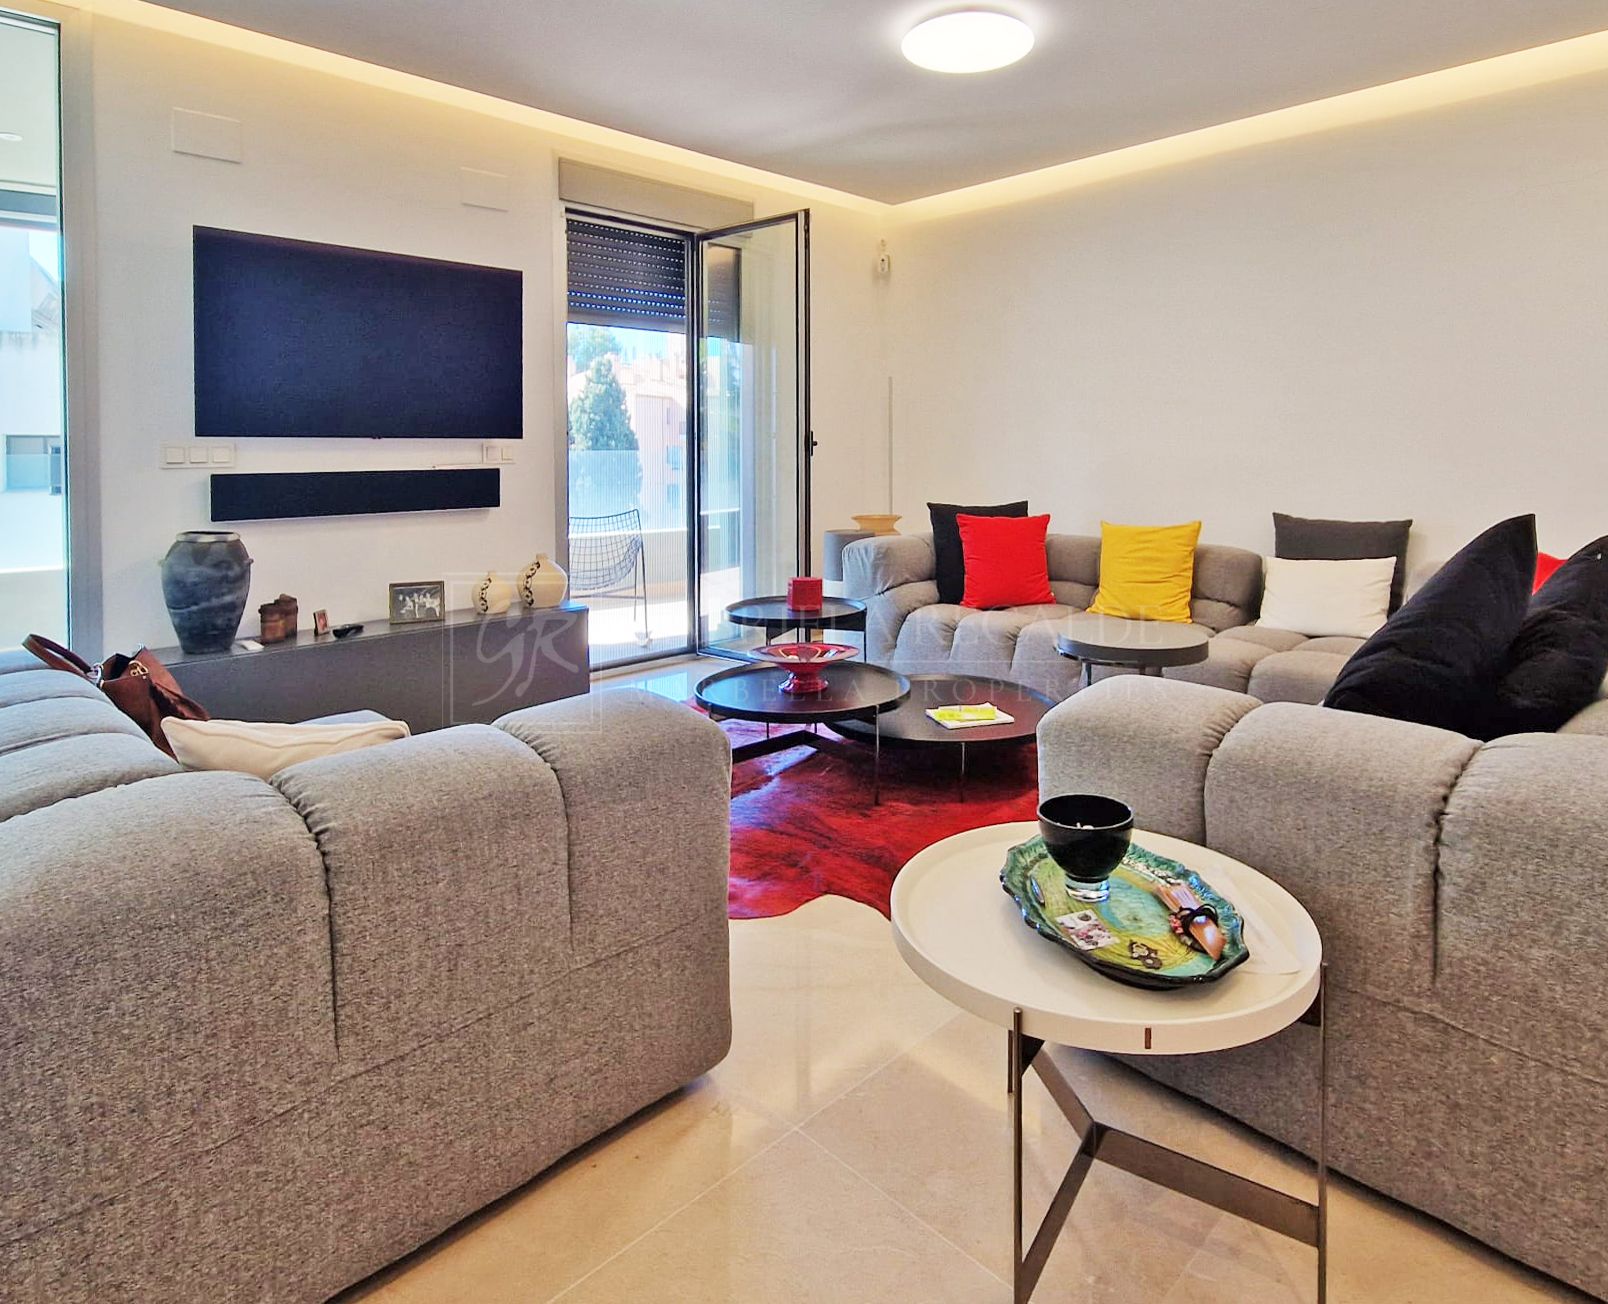 Stylish 3-Bed Apartment in Puerto Banús with Garage and Storage